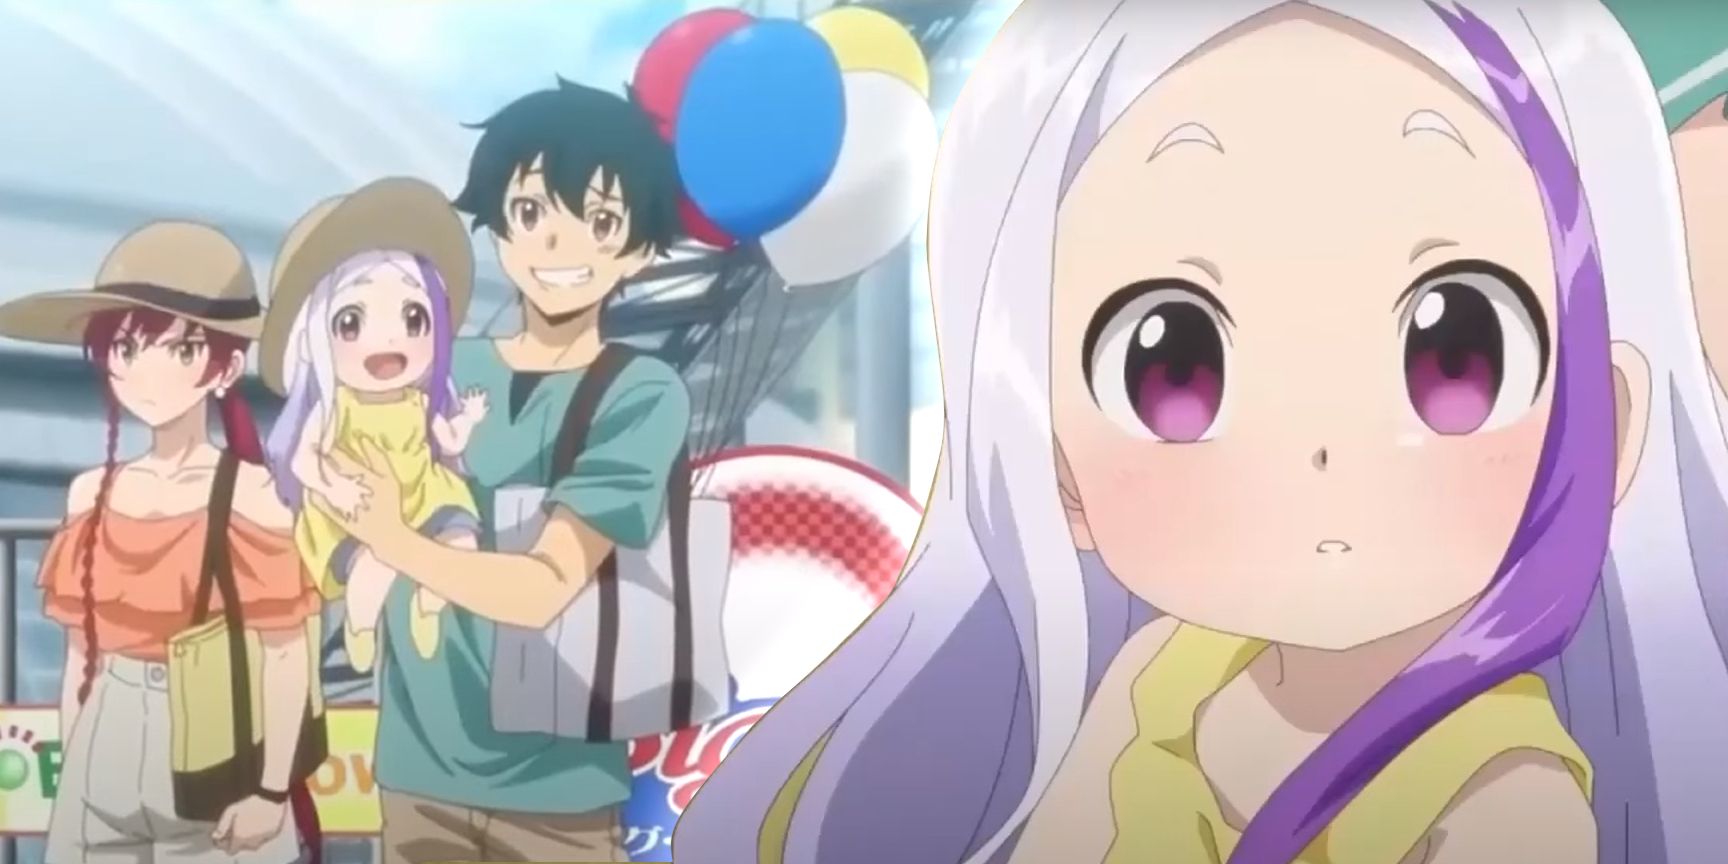 New character in the latest episode of The Devil is a Part-Timer